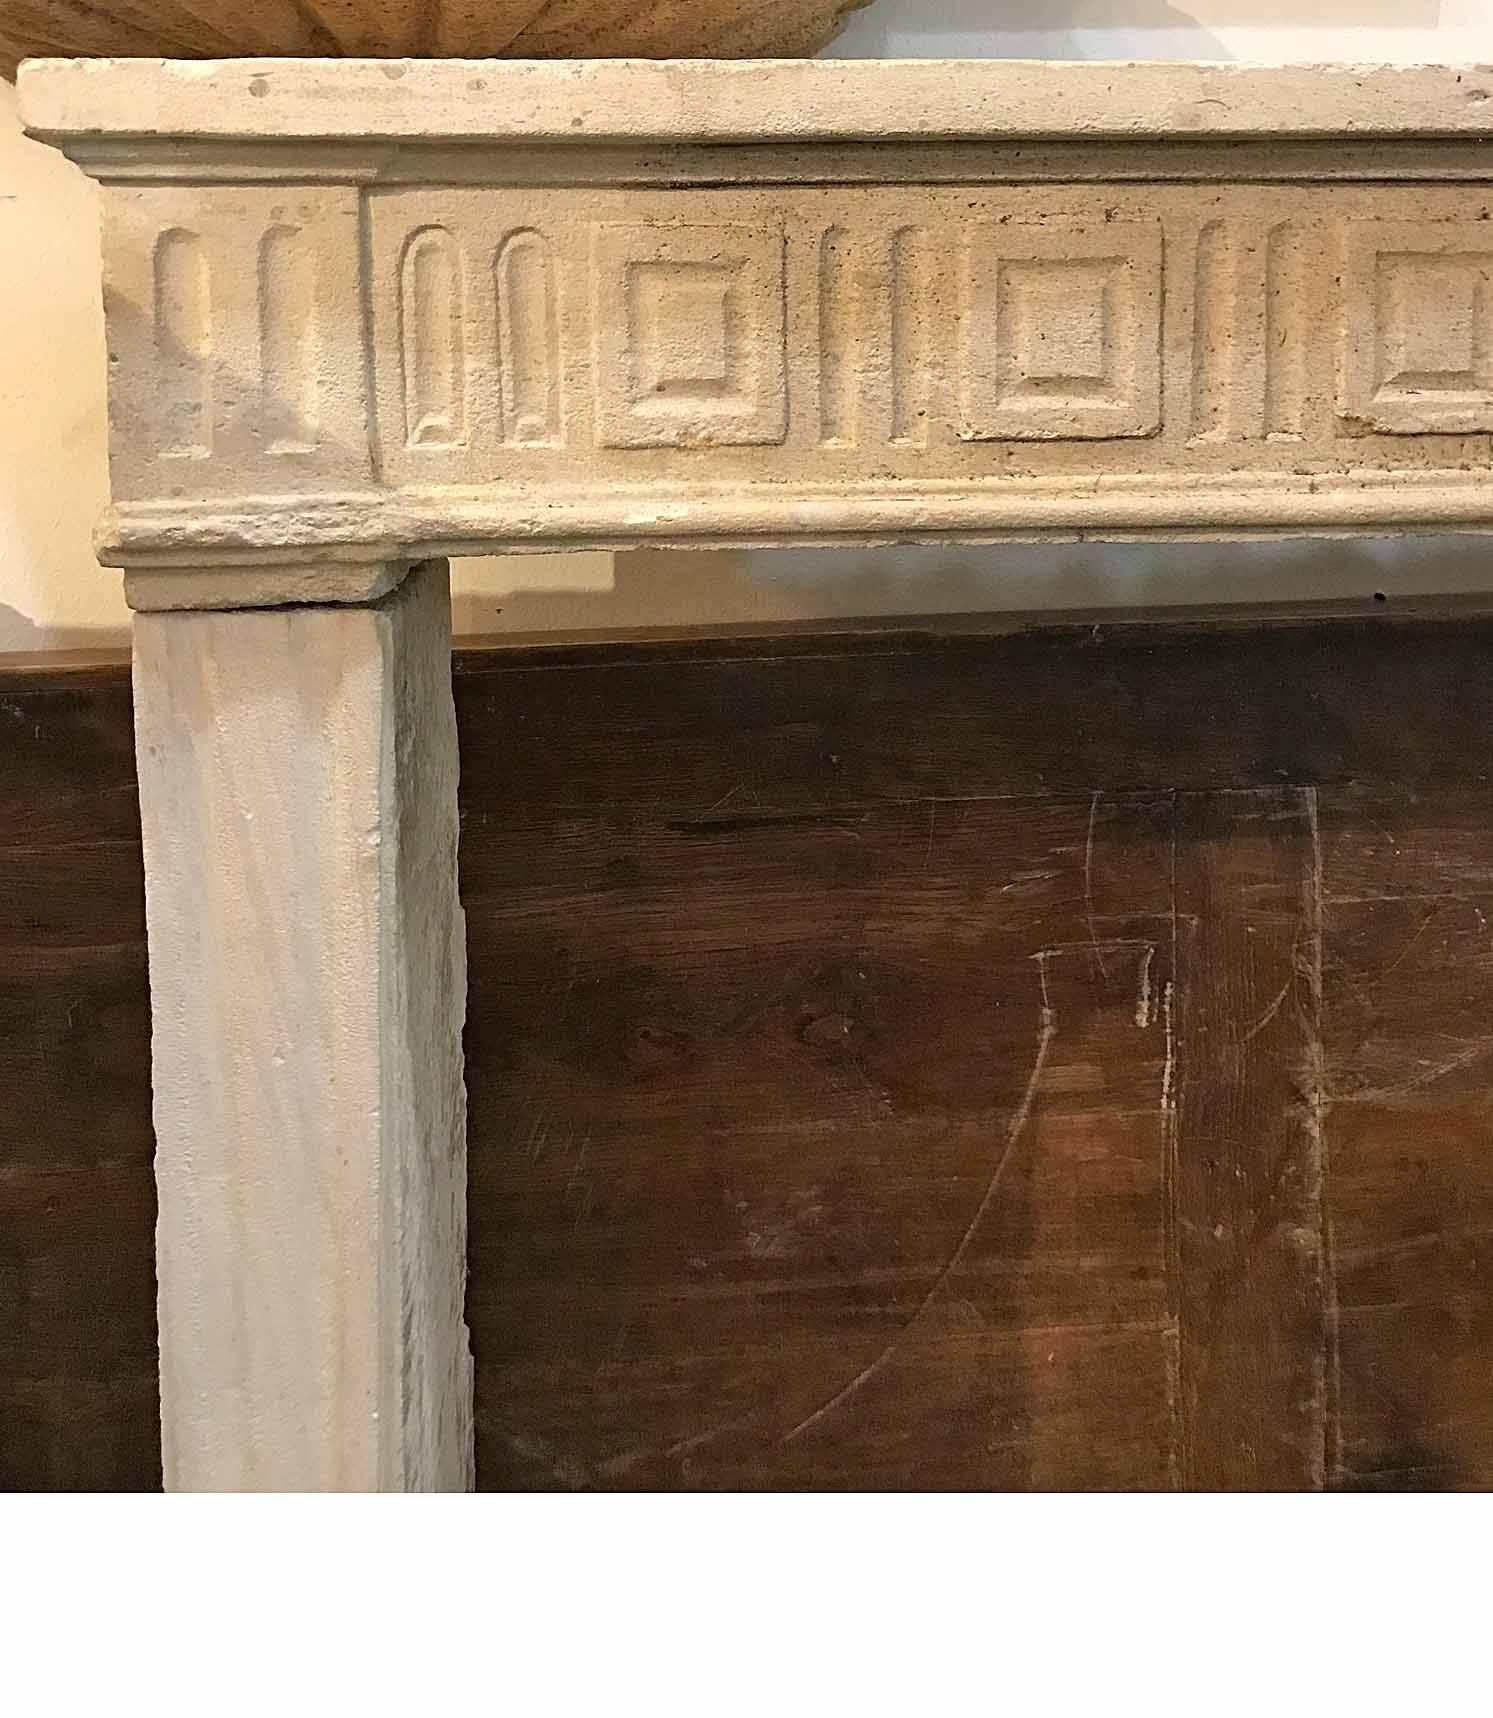 This Louis XVI antique mantel features fluted legs and a great Greek key design on lintel. A wonderful addition to your living quarters. Origin: France, circa 1750. Measurements: 65 1/2